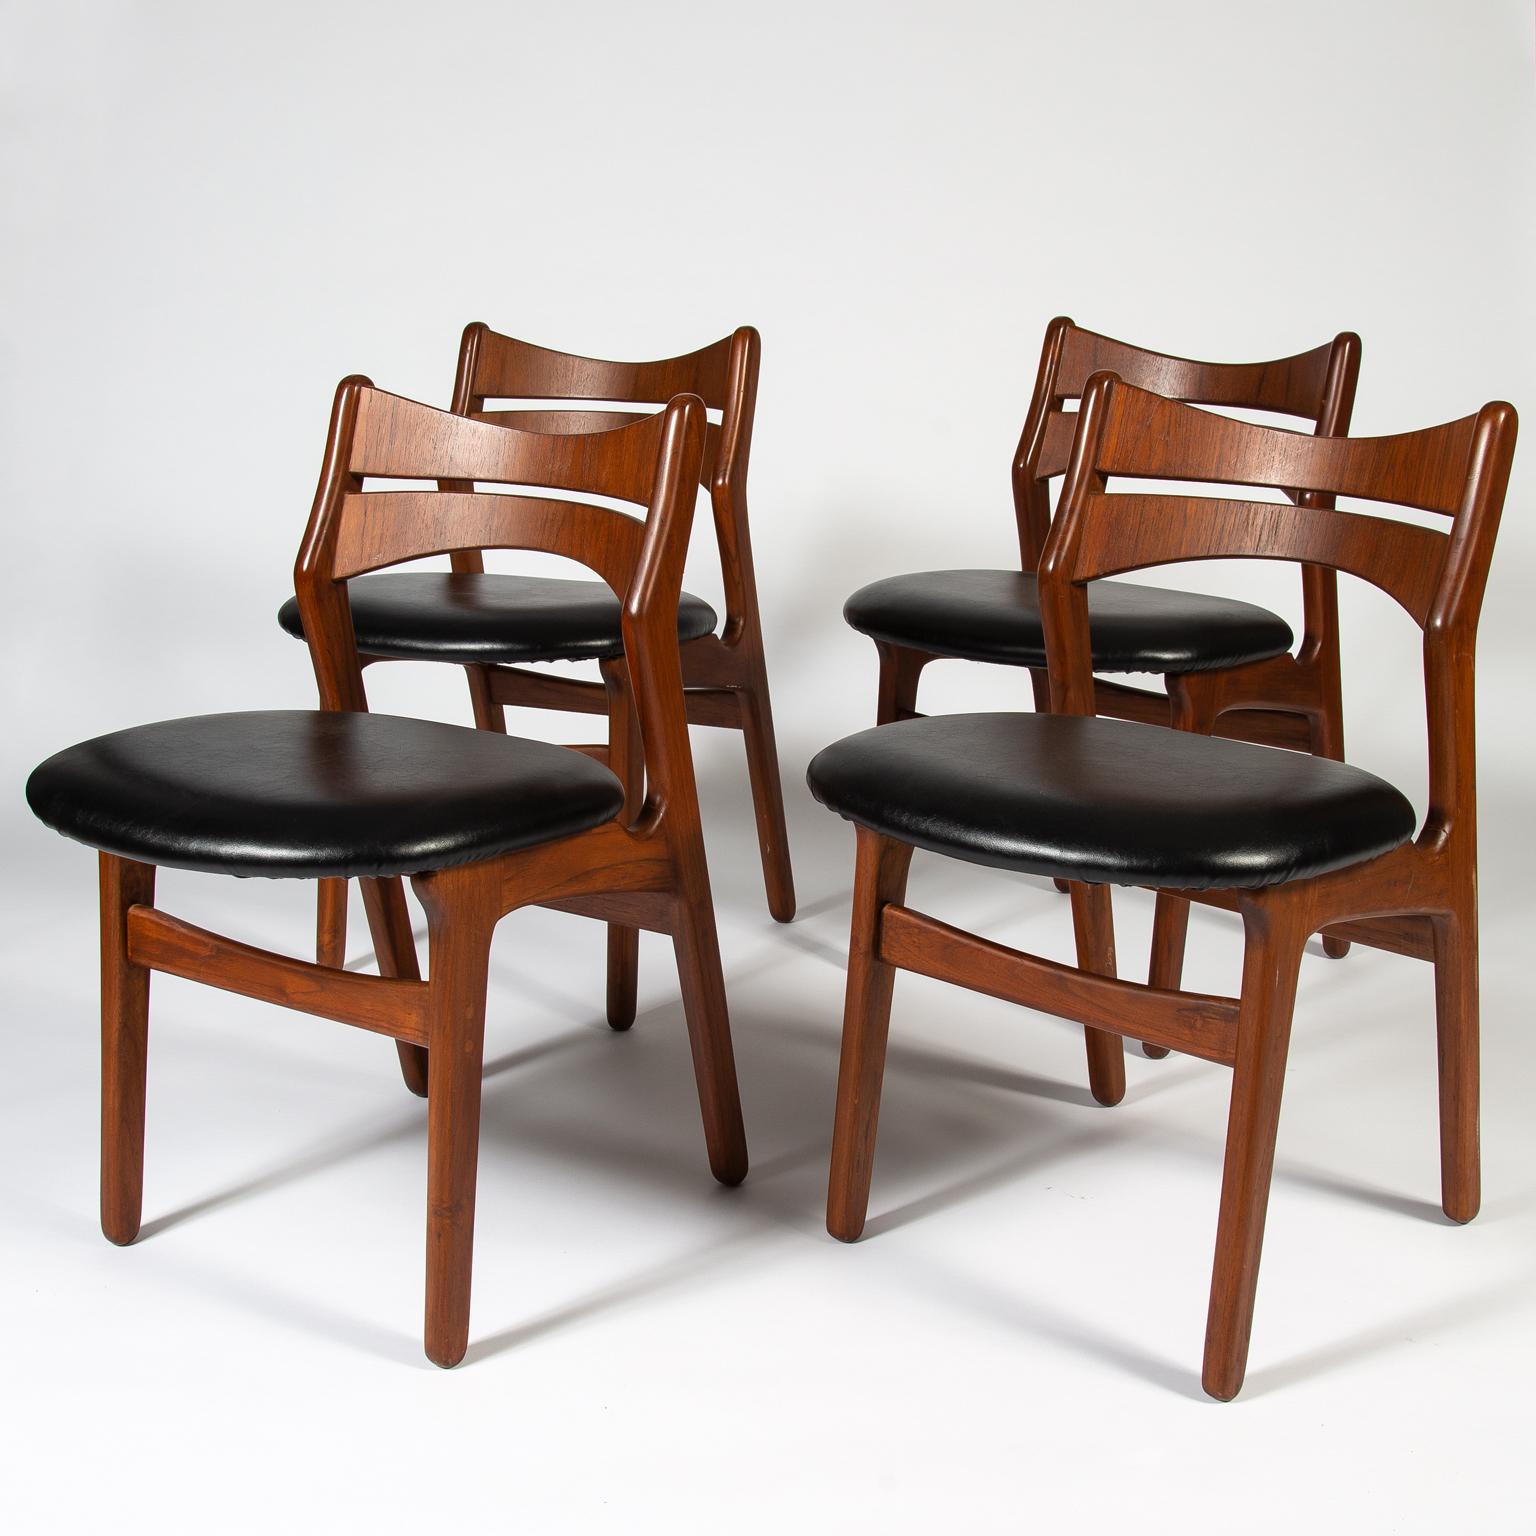 Set of four dining chairs designed by Erik Buck and manufactured by Christiansen Møbelfabrik. The chairs have a beautiful sculptural solid teak frame, distinctive of the Danish modern style, with the seat pad upholstered in a hard wearing black